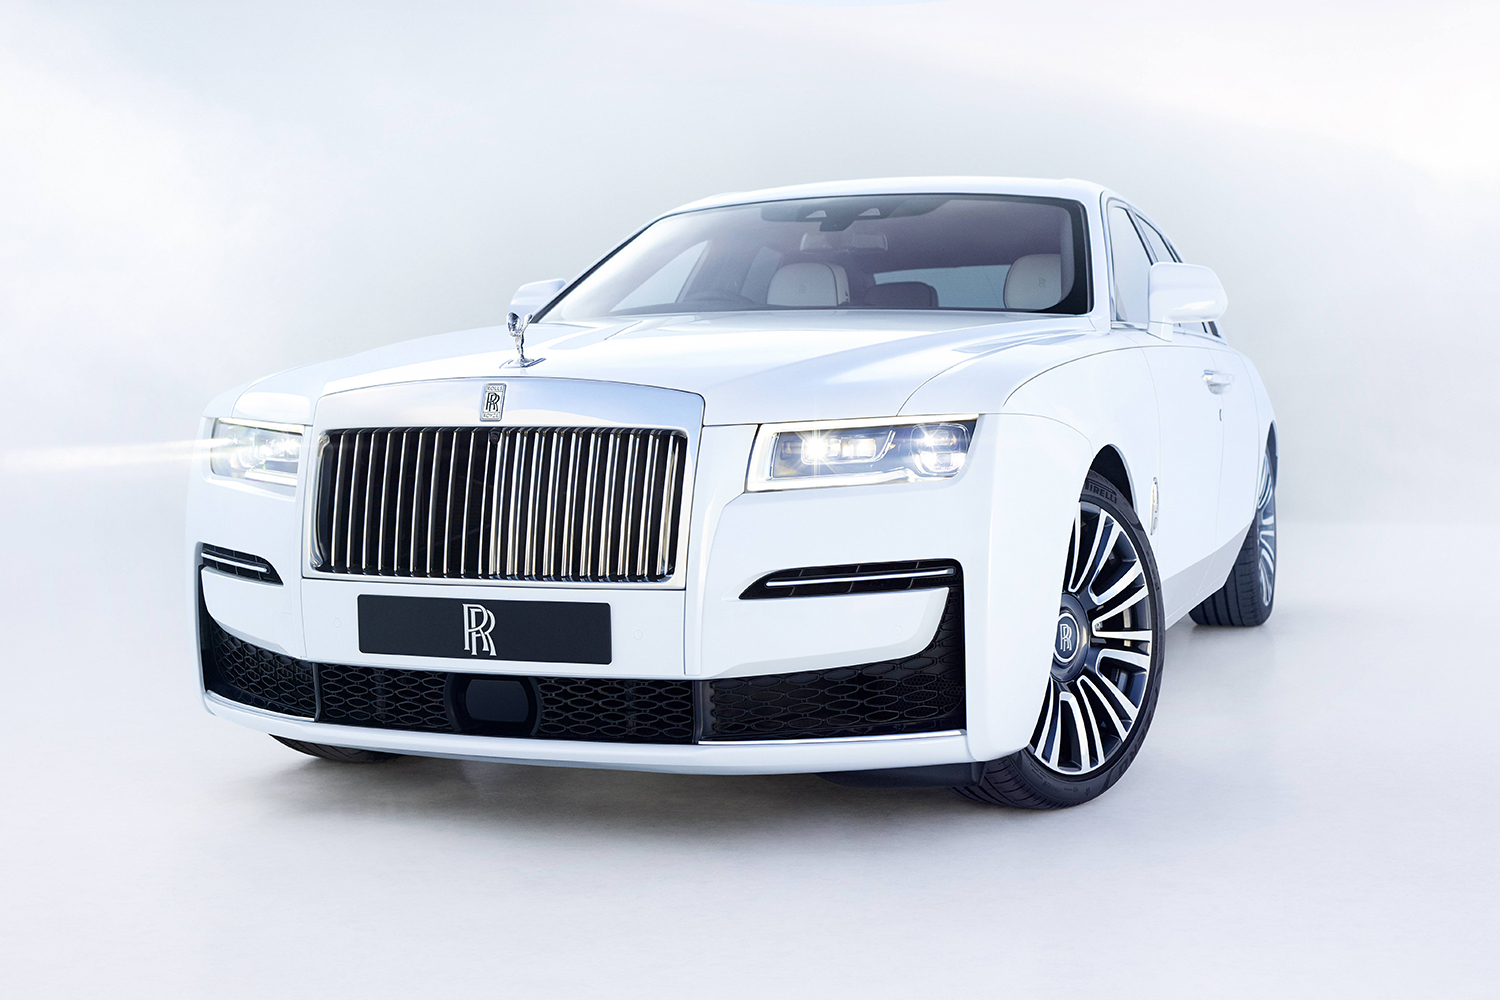 The new 2021 Rolls-Royce Ghost car in white